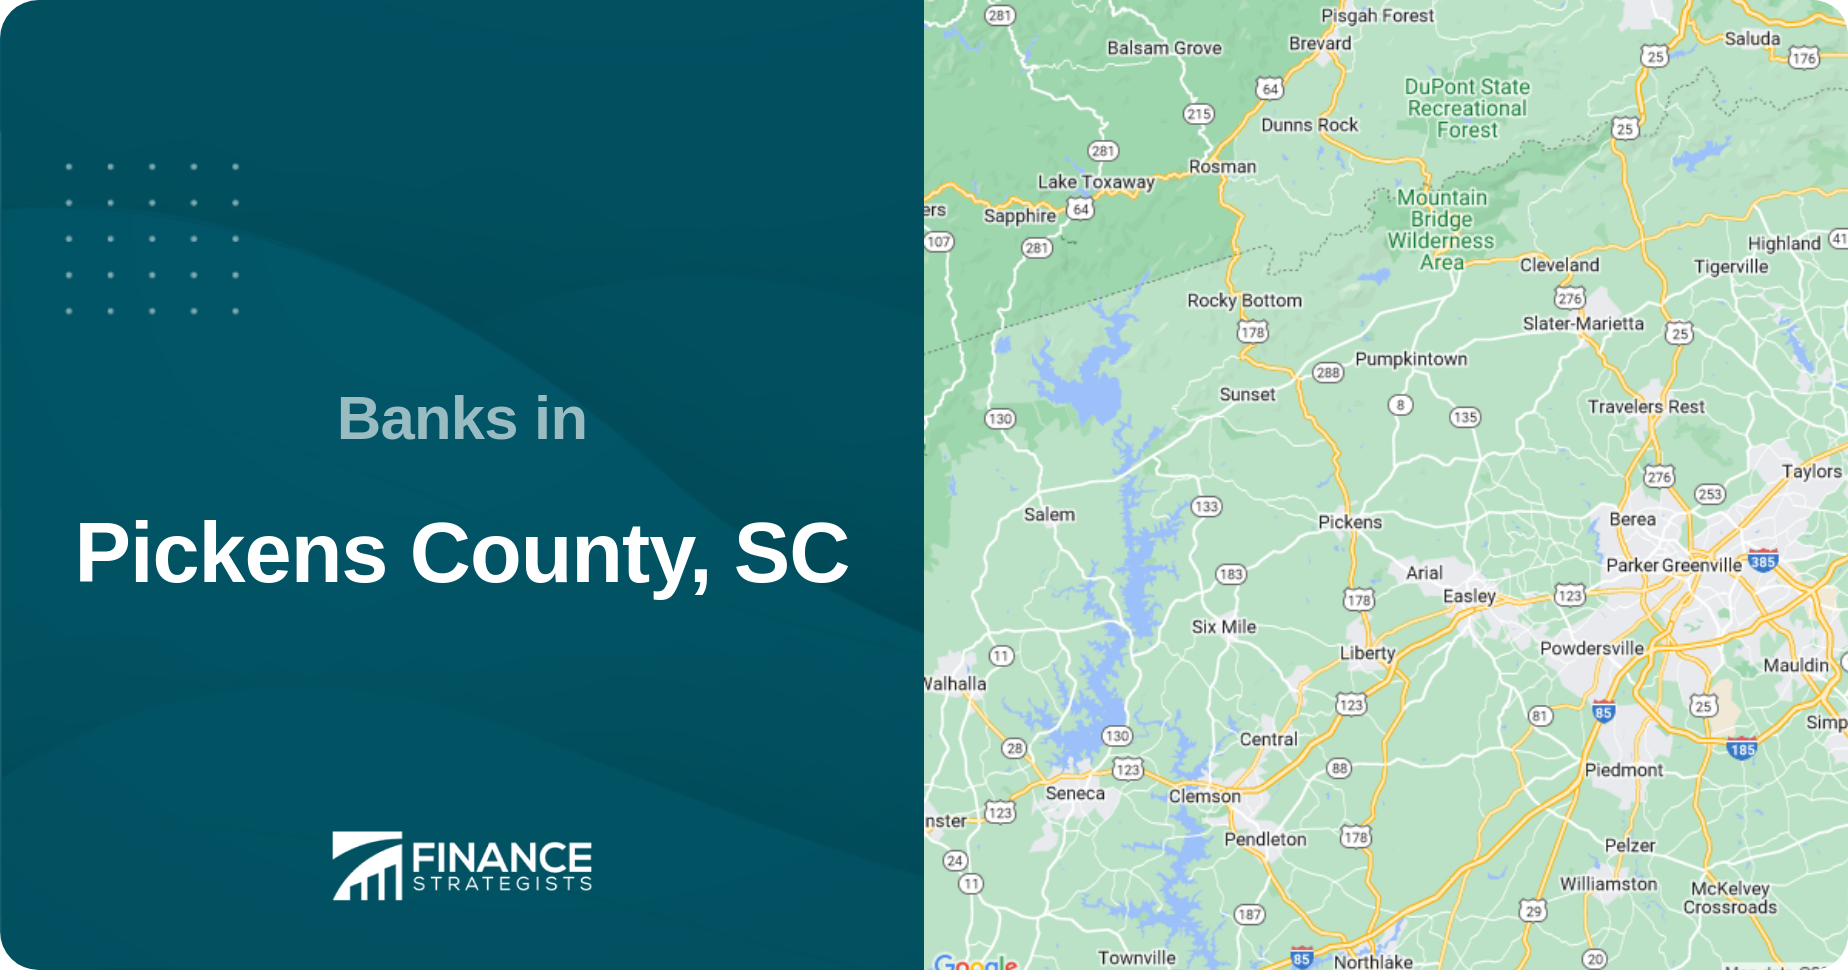 Banks in Pickens County, SC